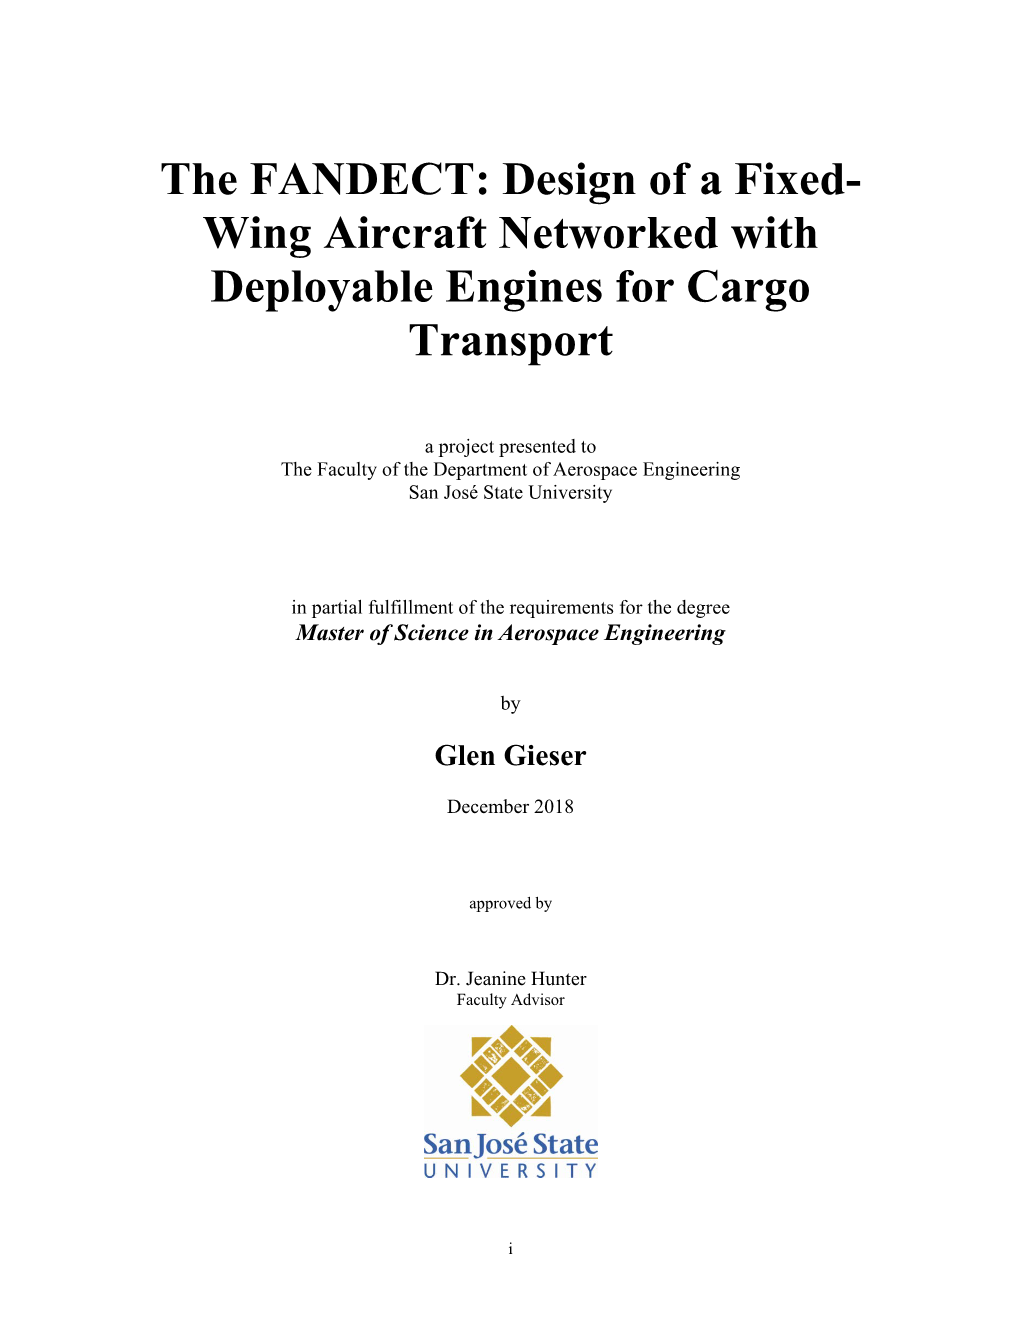 The FANDECT: Design of a Fixed- Wing Aircraft Networked with Deployable Engines for Cargo Transport